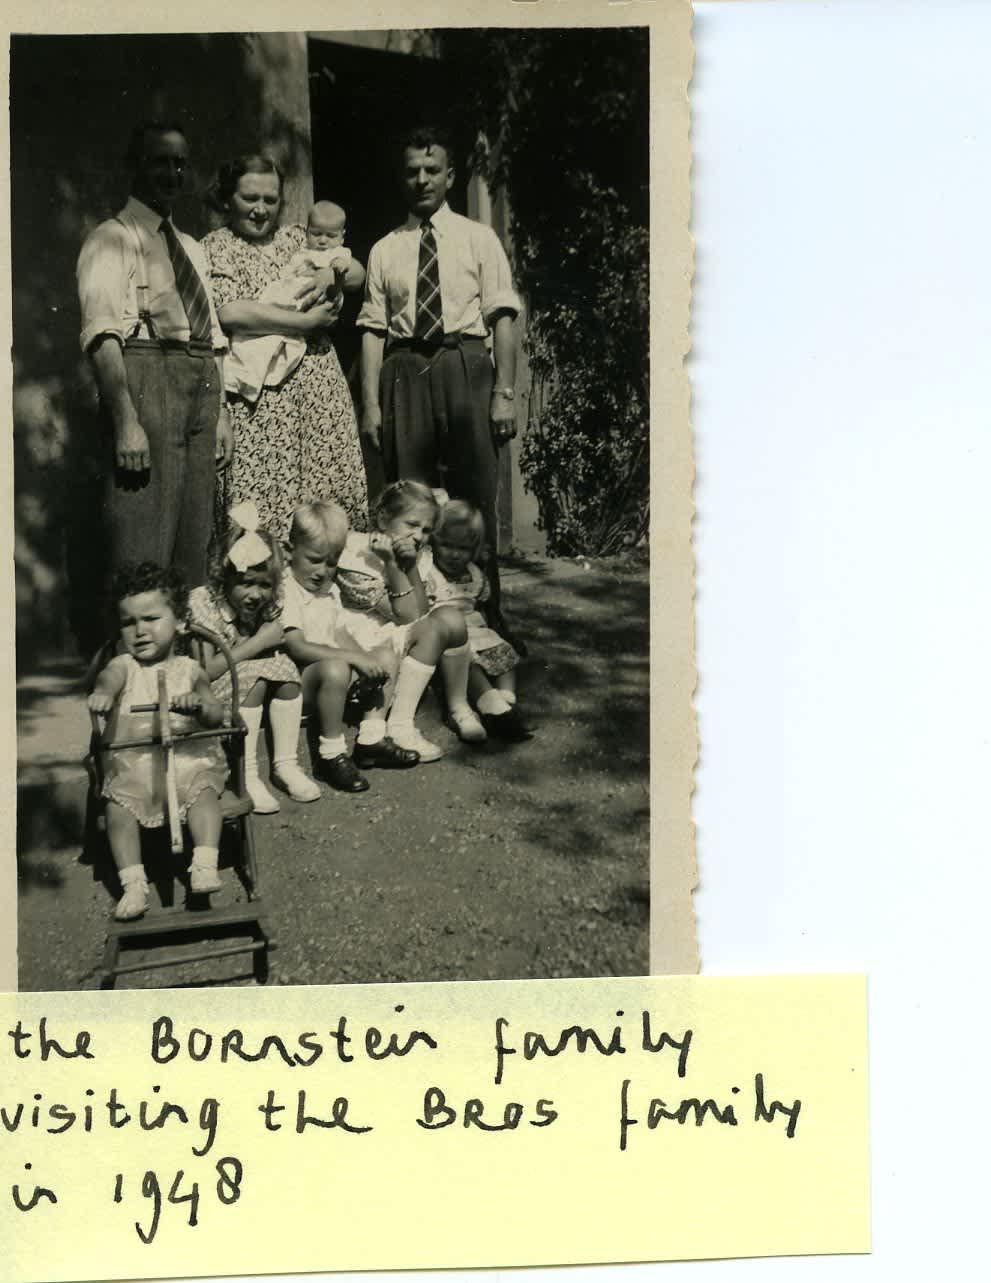 Bornstein family visiting the Bros family in 1948, the Bornstein family visiting the Bros family, 1948